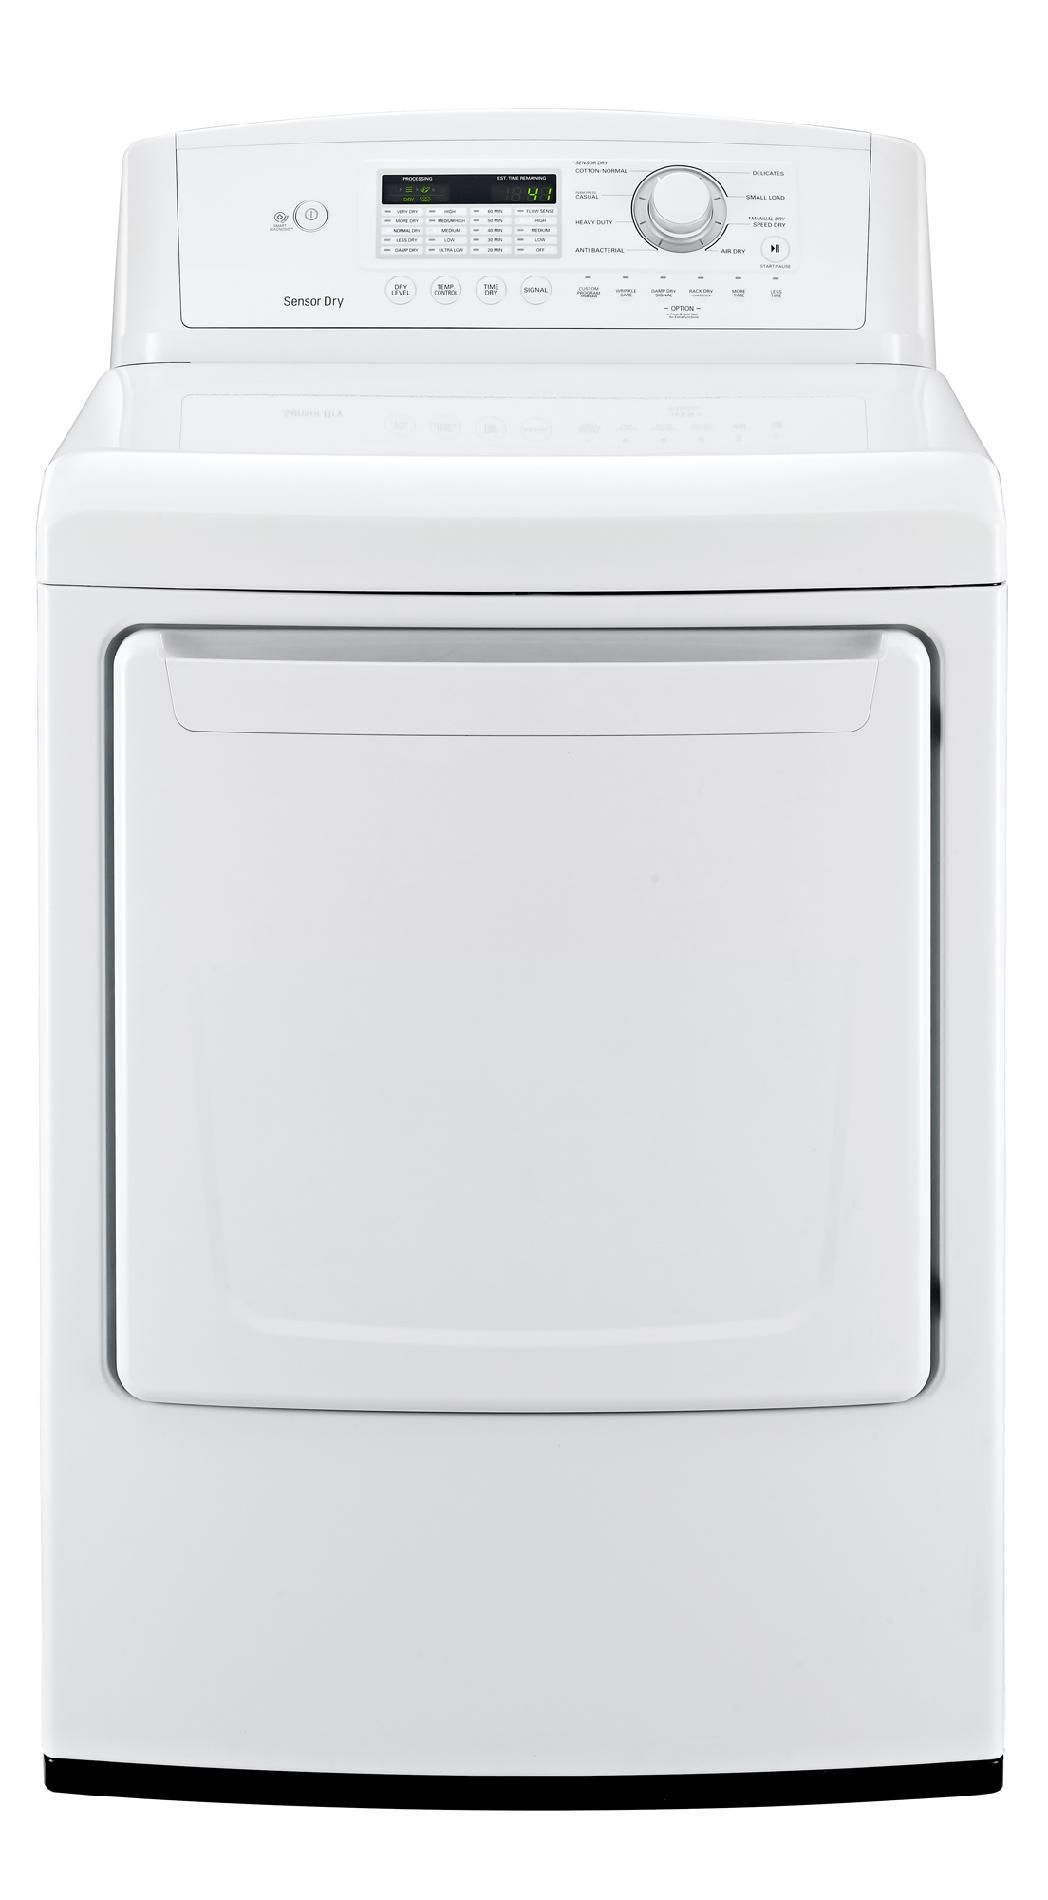 LG 7.3 cu. ft. Electric Dryer - White